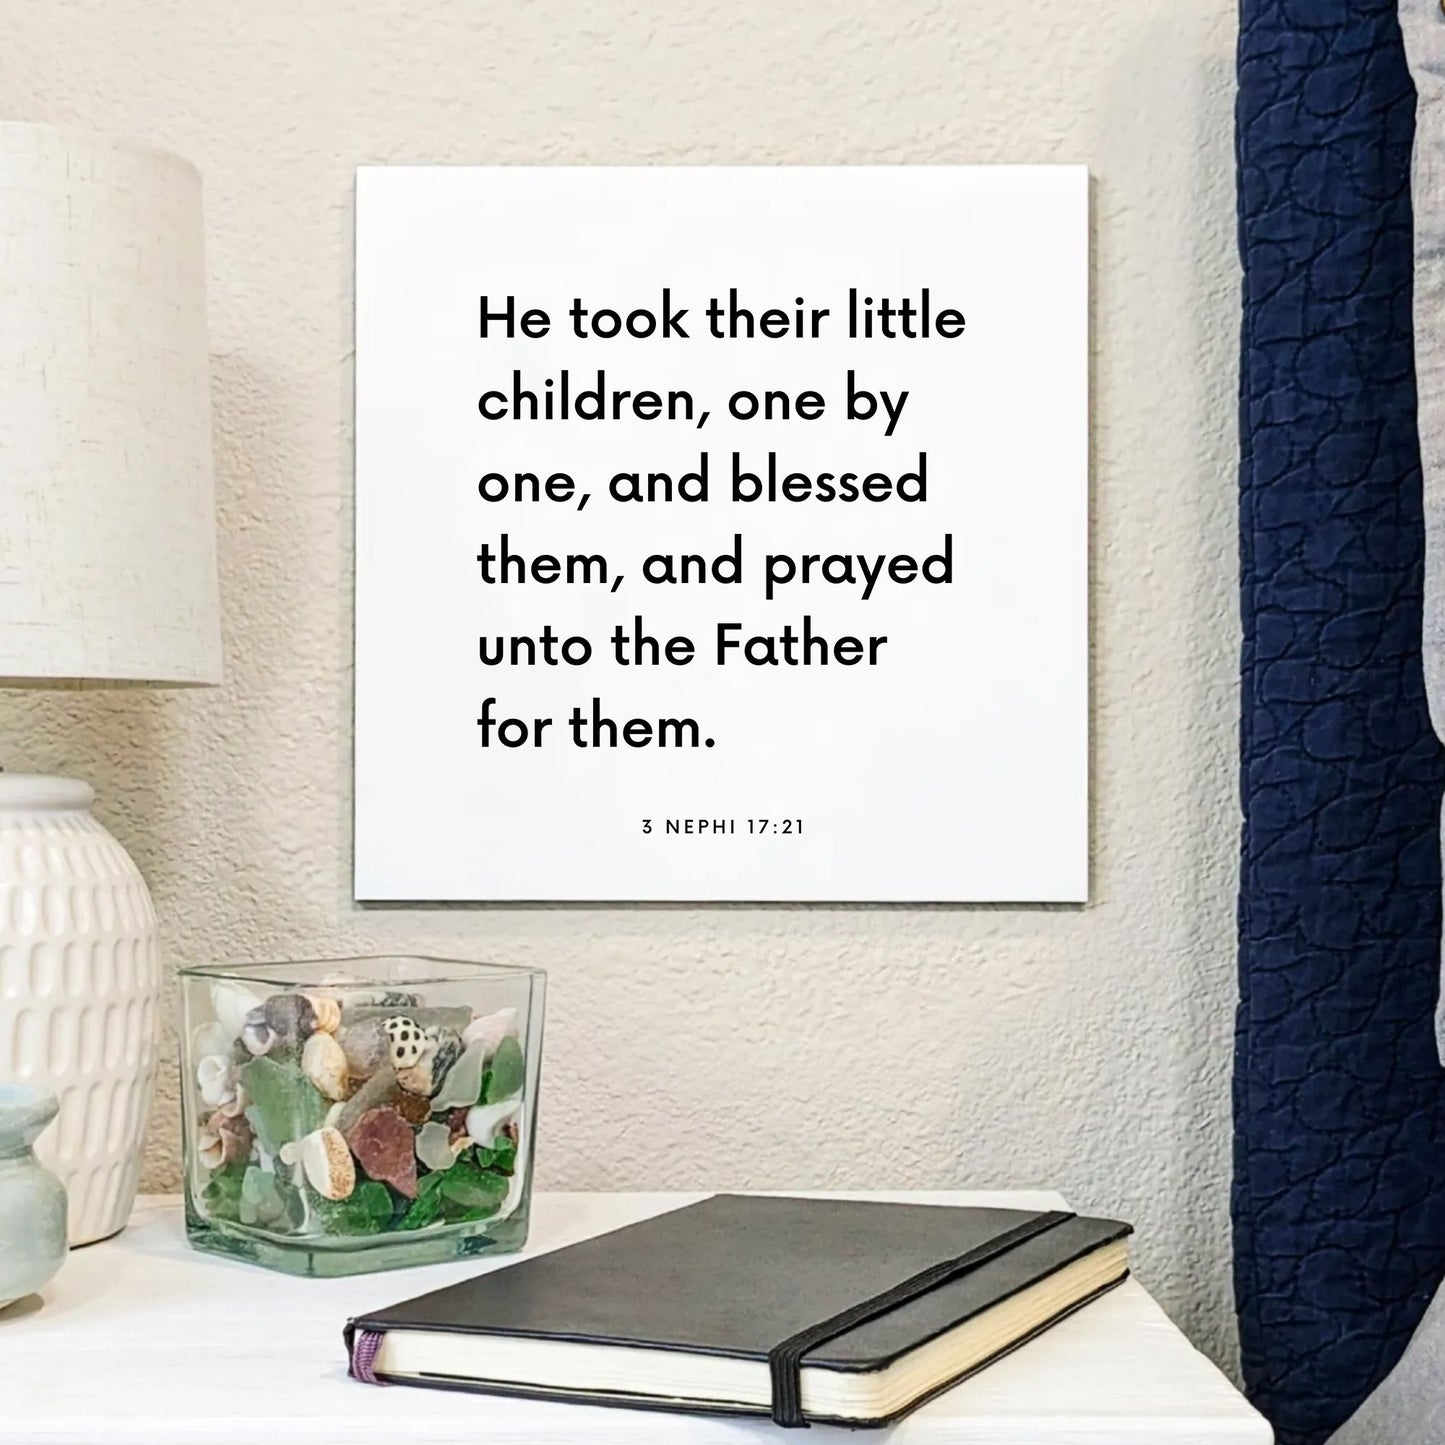 Bedside mouting of the scripture tile for 3 Nephi 17:21 - "He took their little children, one by one"